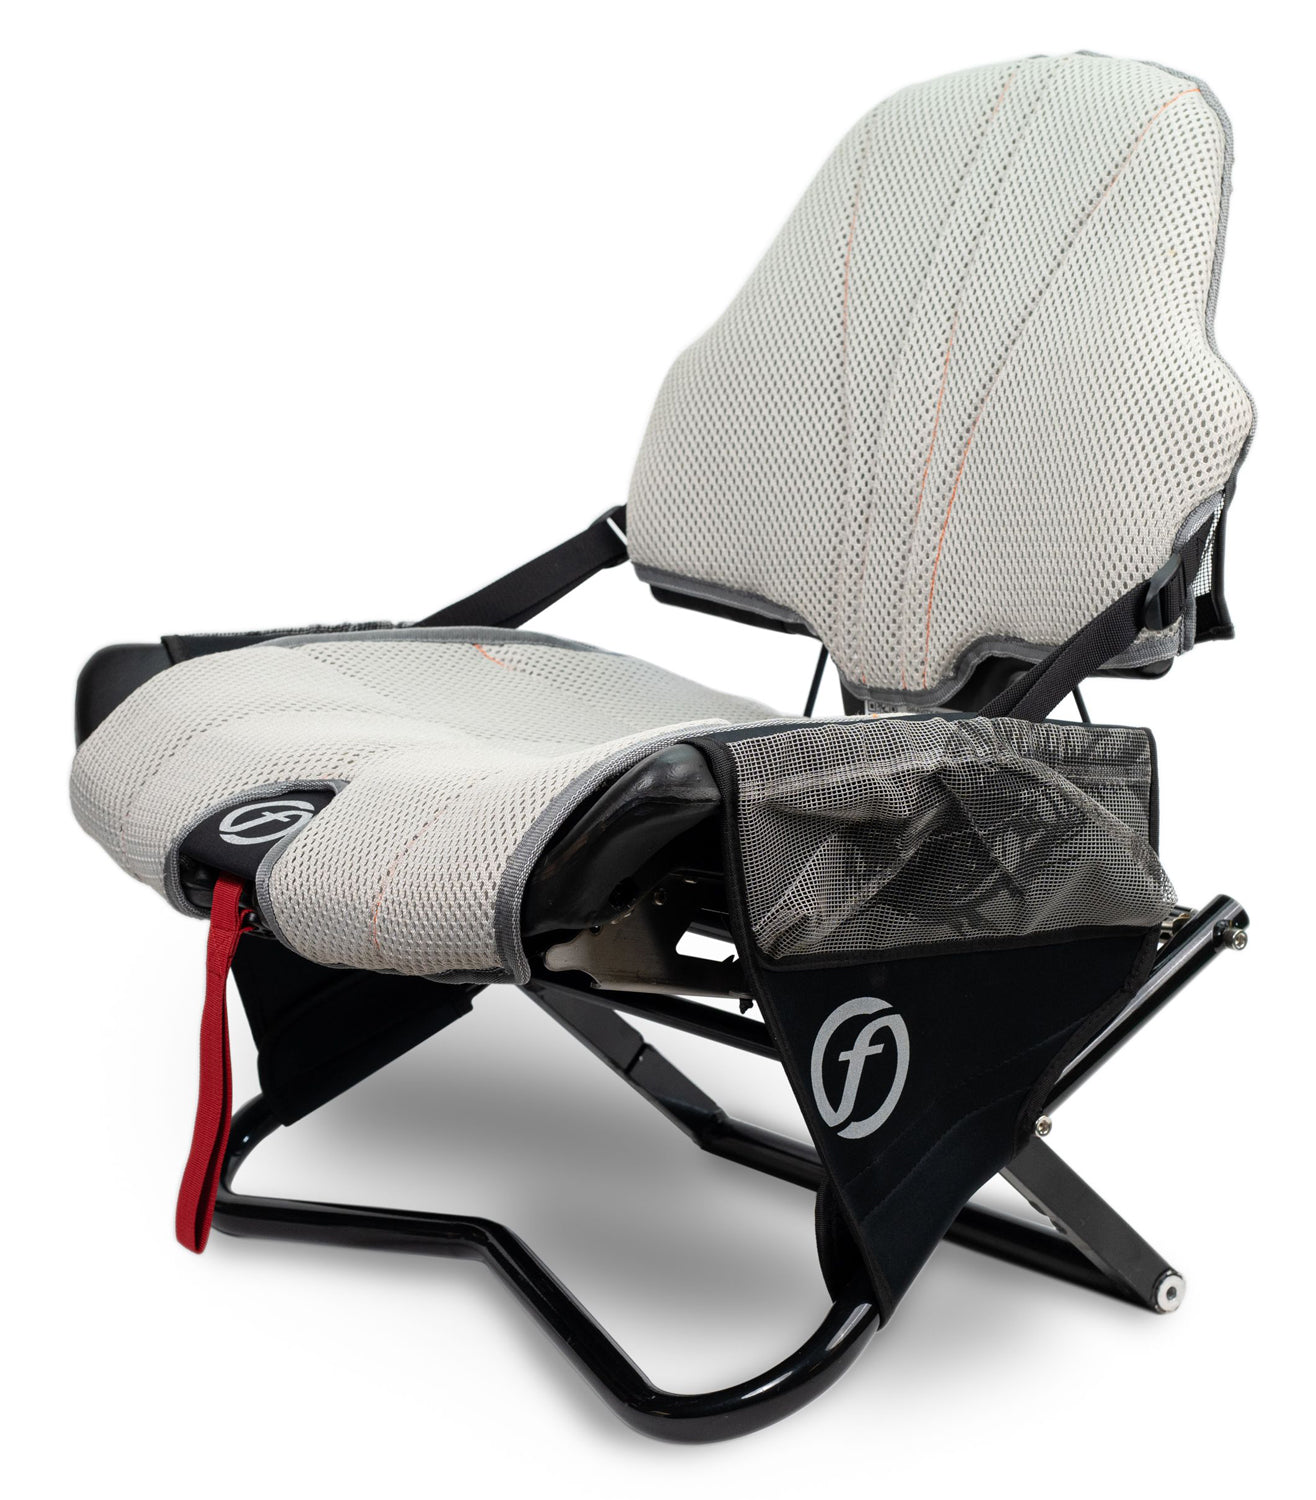 Feelfree Gravity Seat with High Backrest